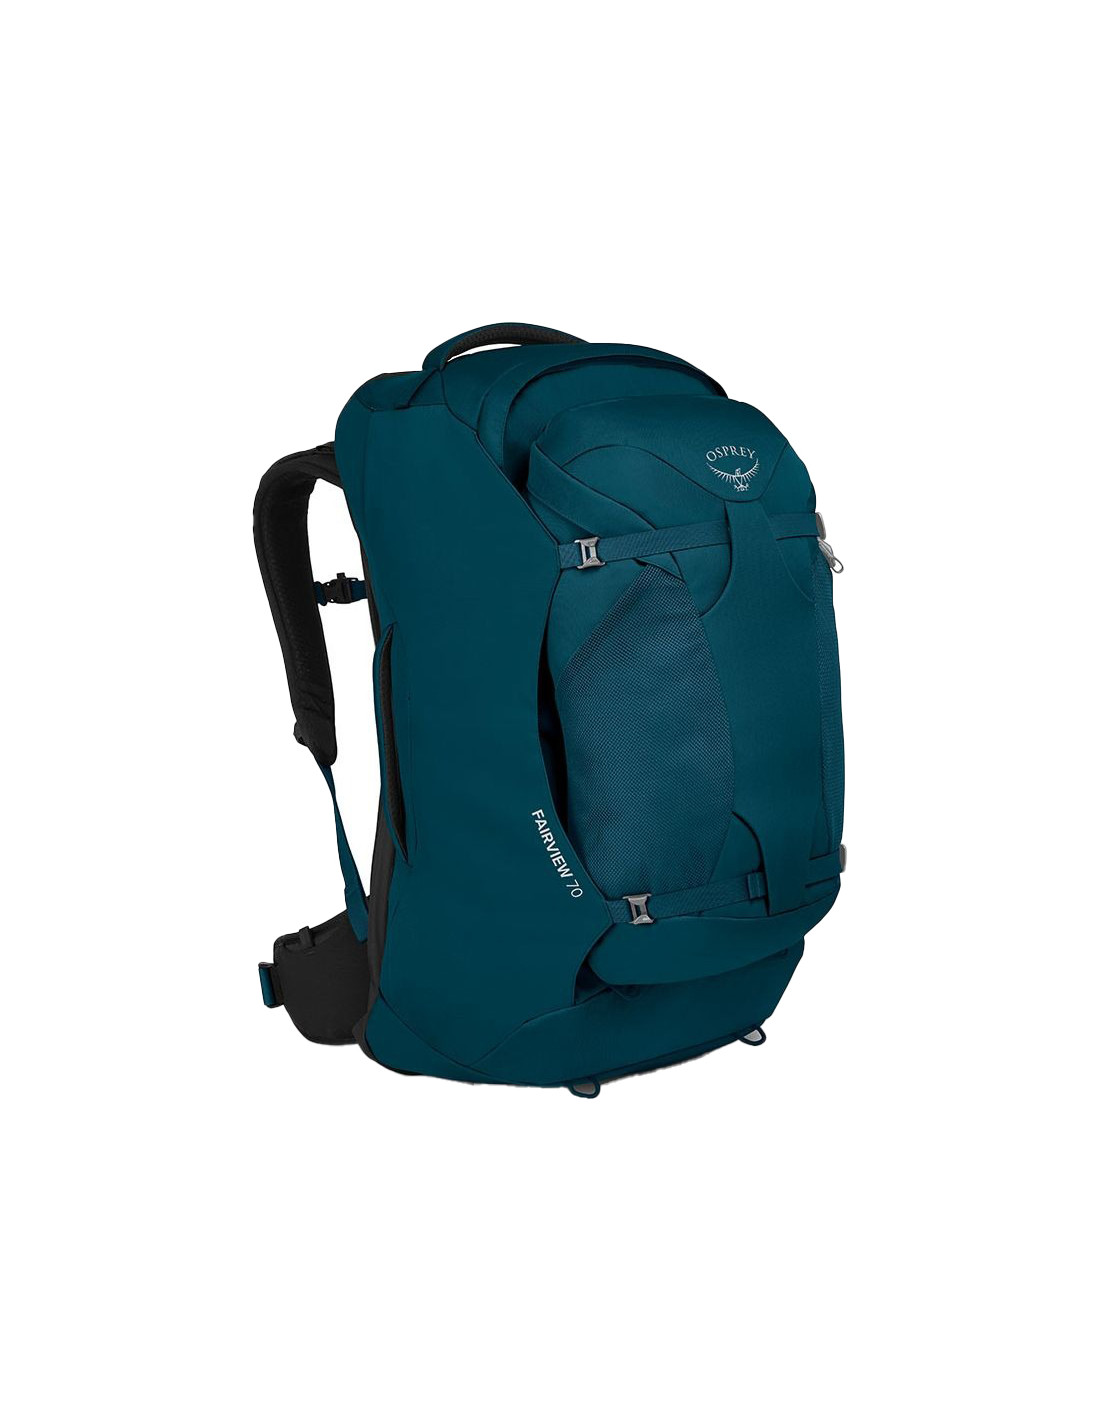 FAIRVIEW 70 TRAVEL PACK